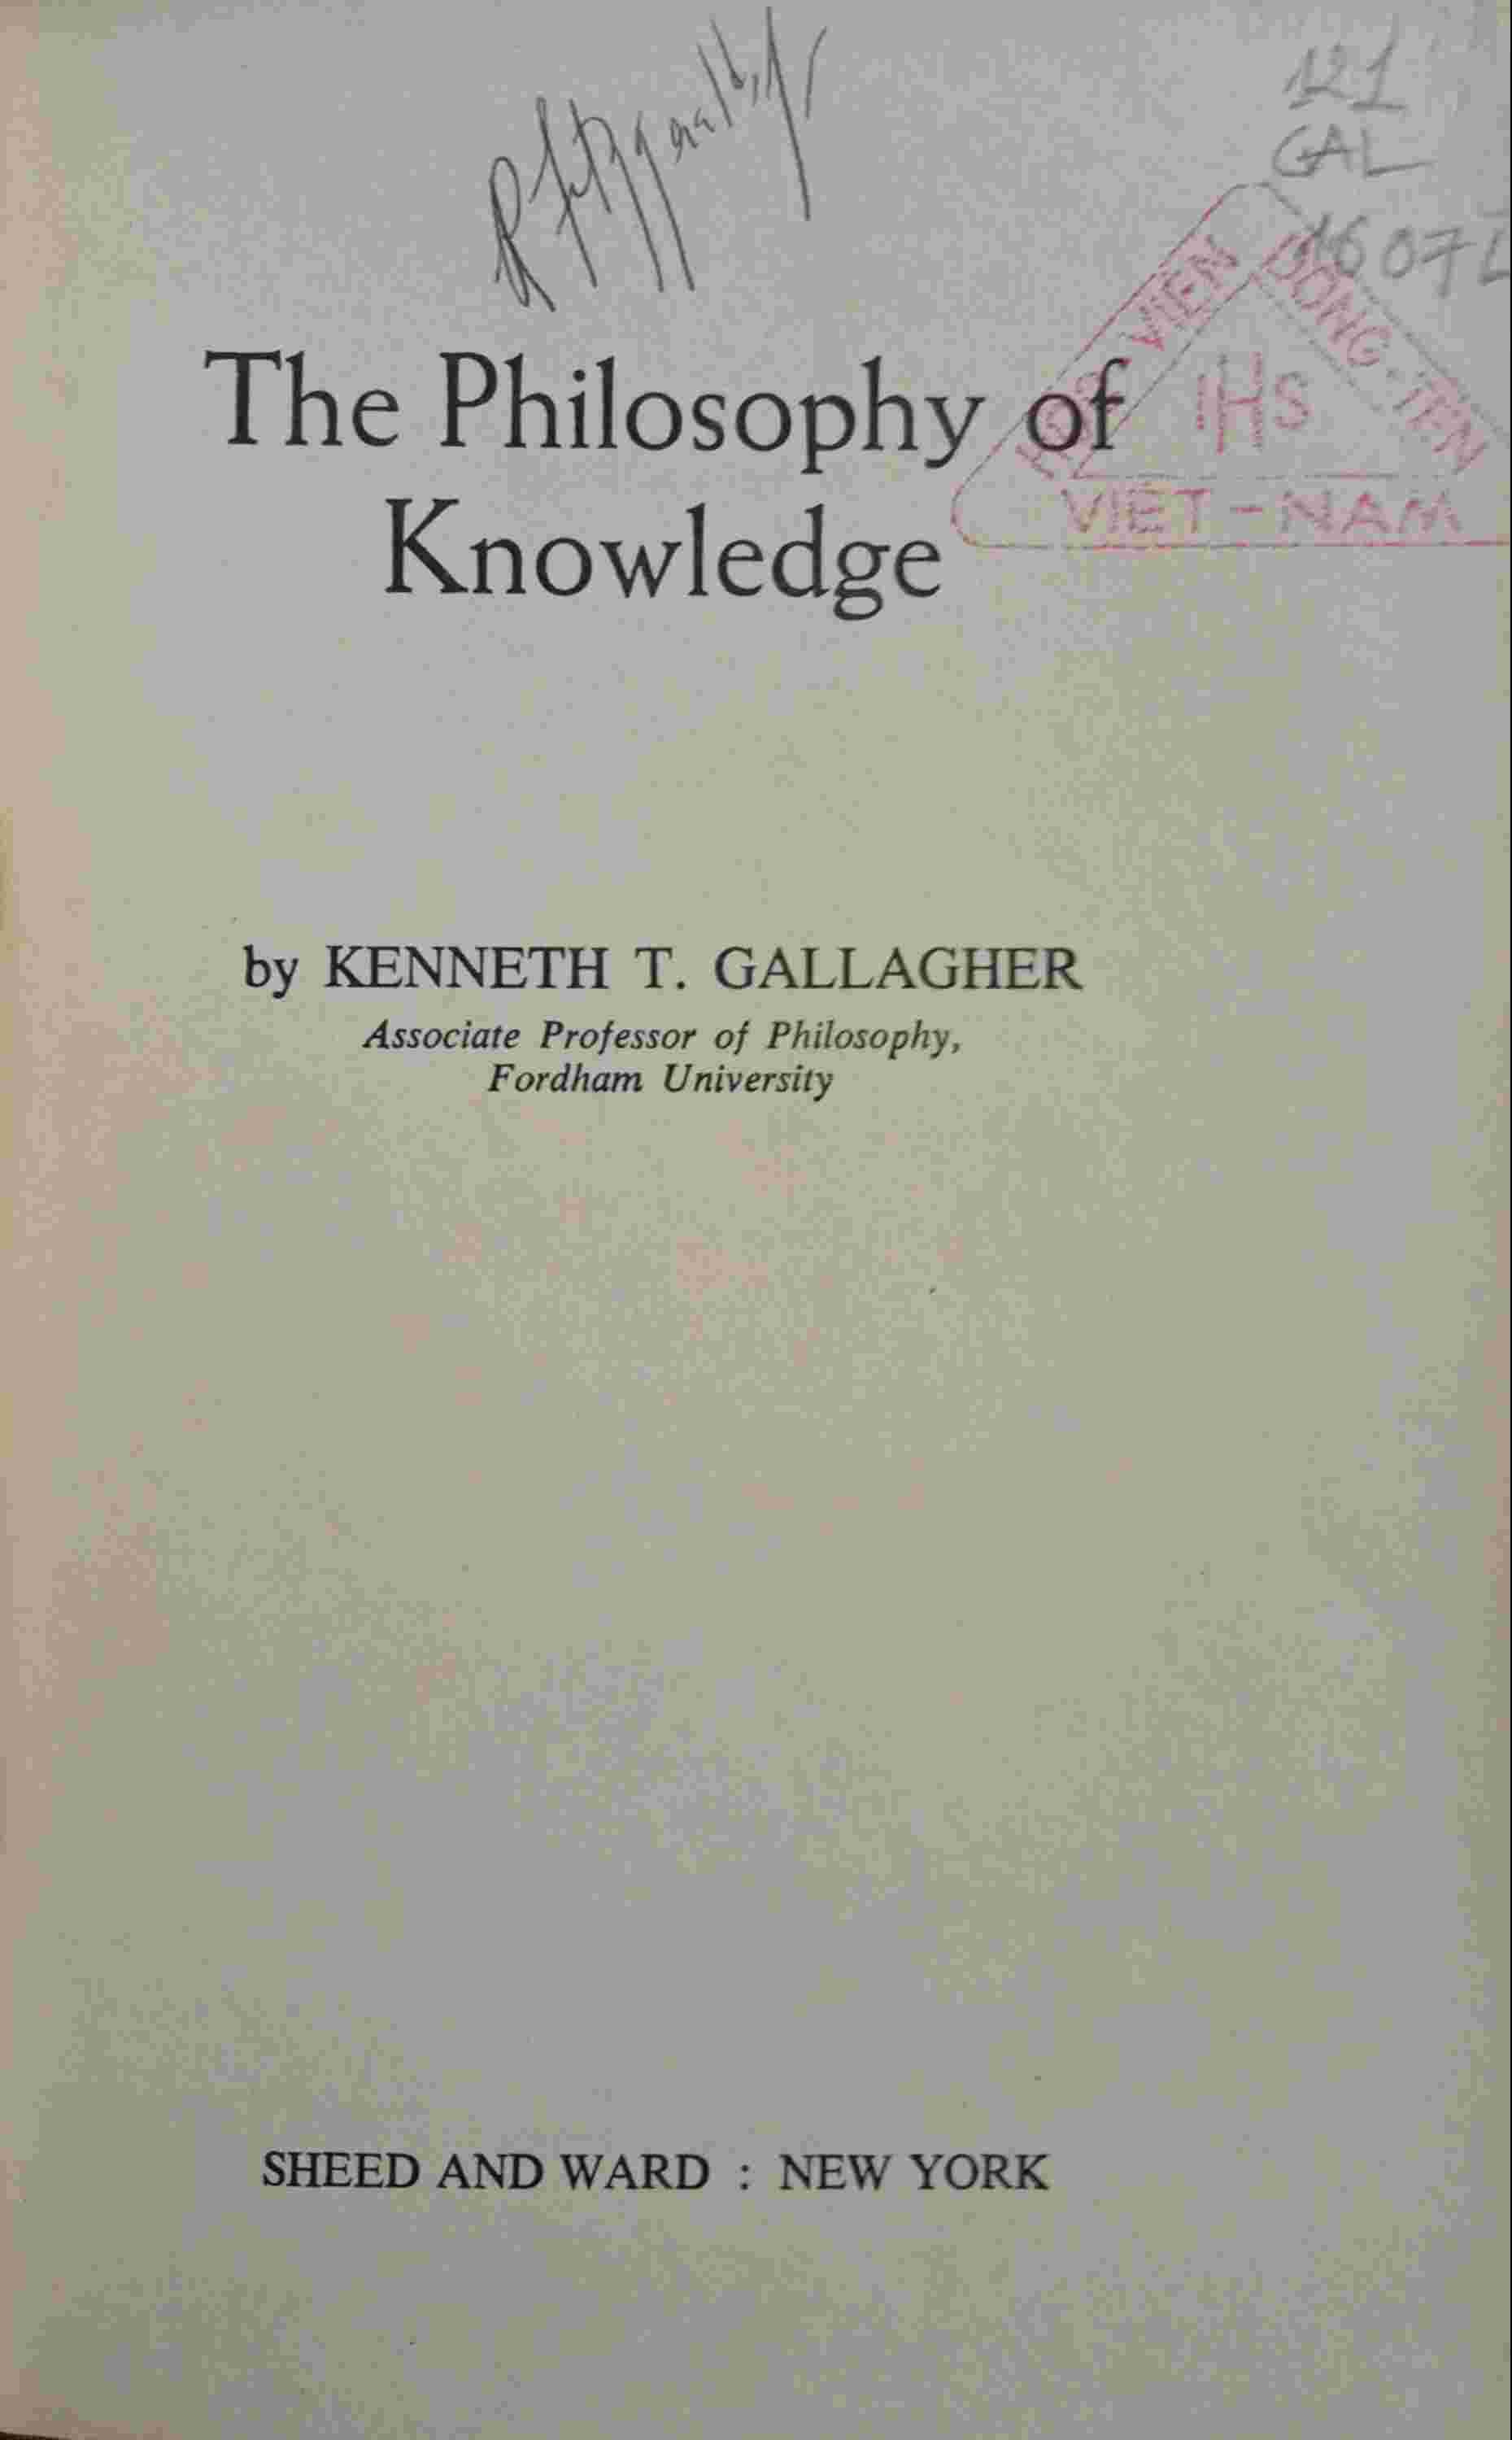 THE PHILOSOPHY OF KNOWLEDGE